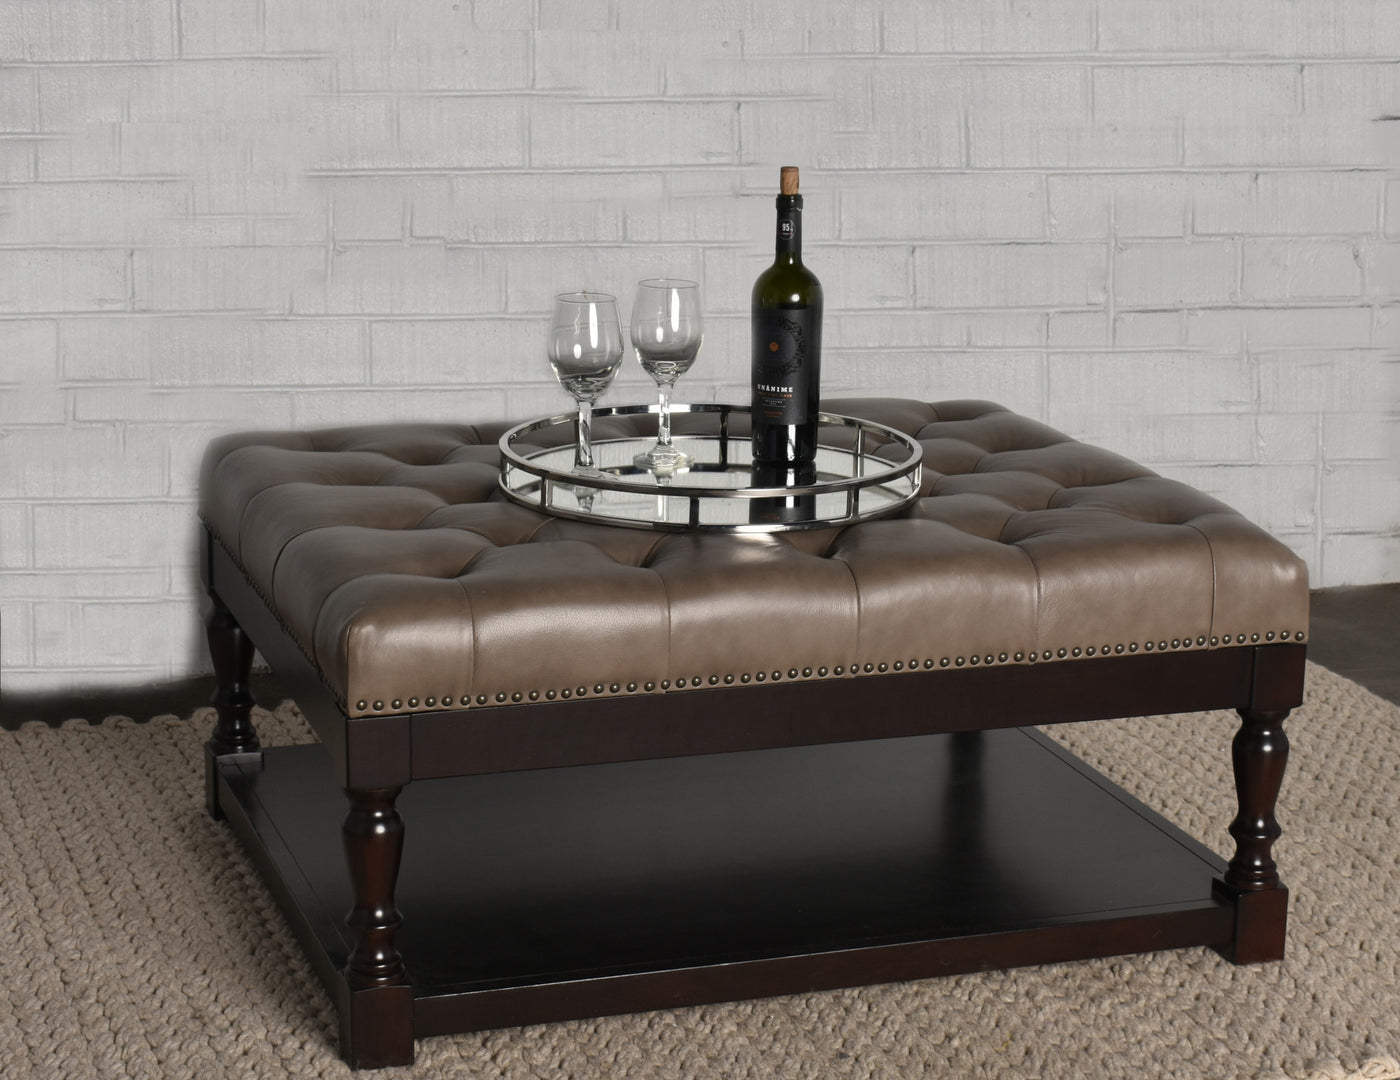 34.5" Dark Grey and Dark Brown Tufted Leather Coffee Table